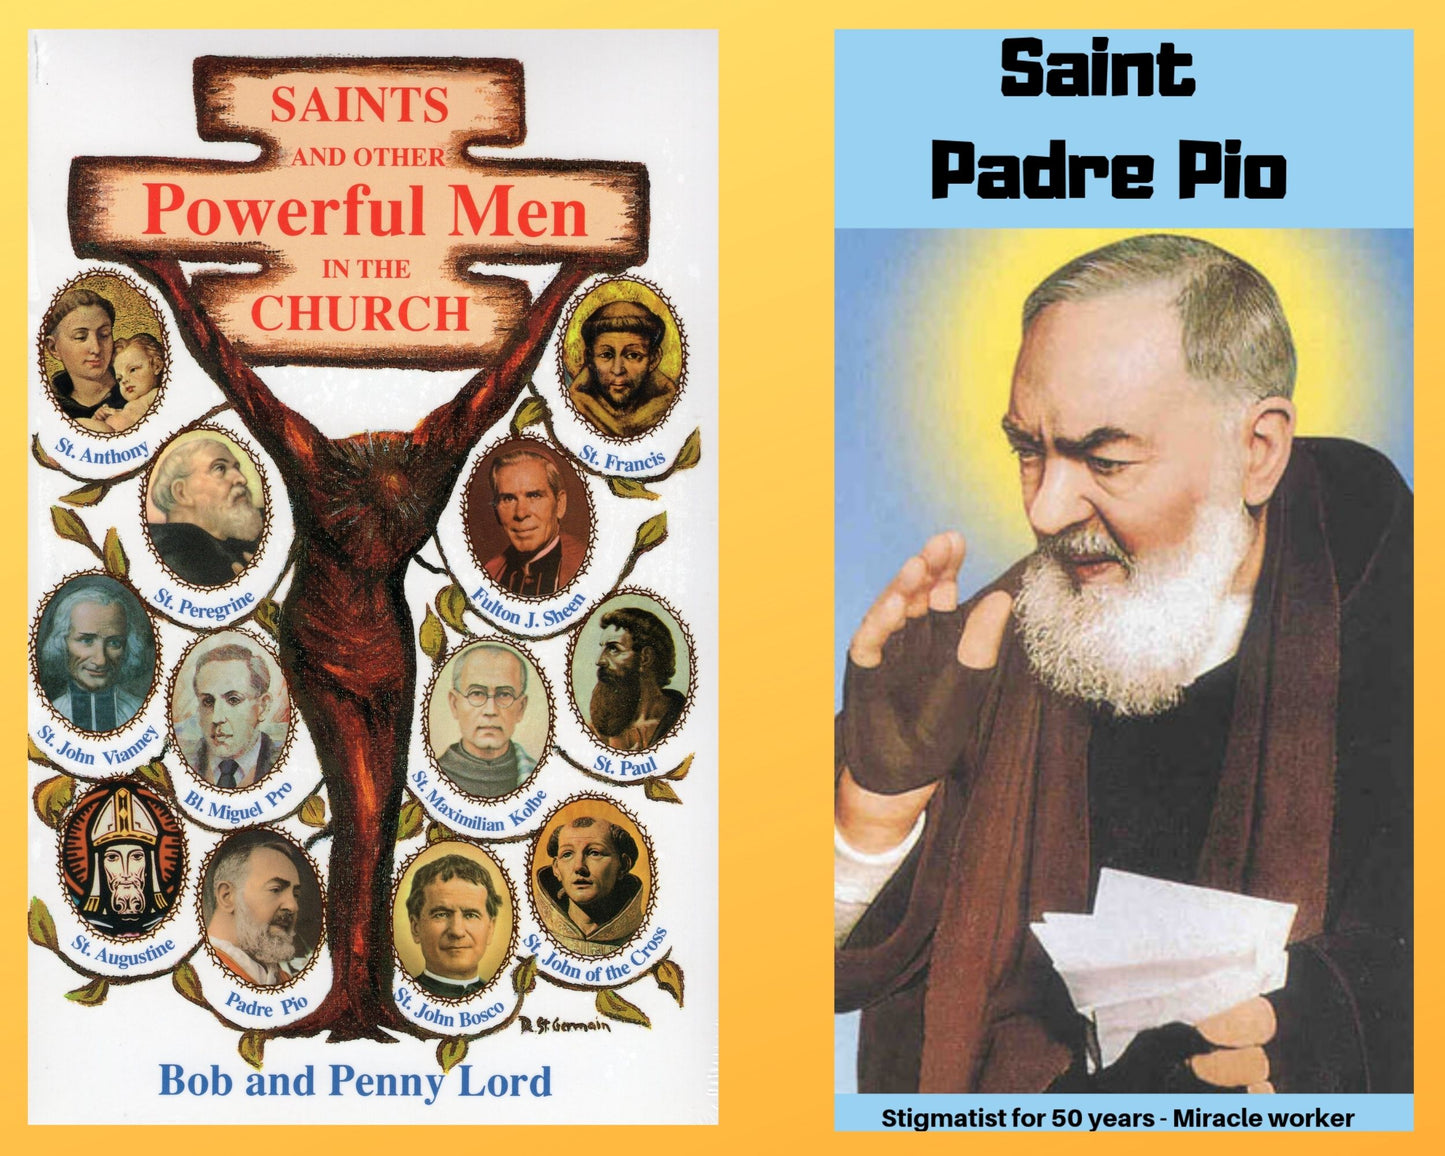 Saints and Other Powerful Men Book and Companion Saint Padre Pio DVD - Bob and Penny Lord